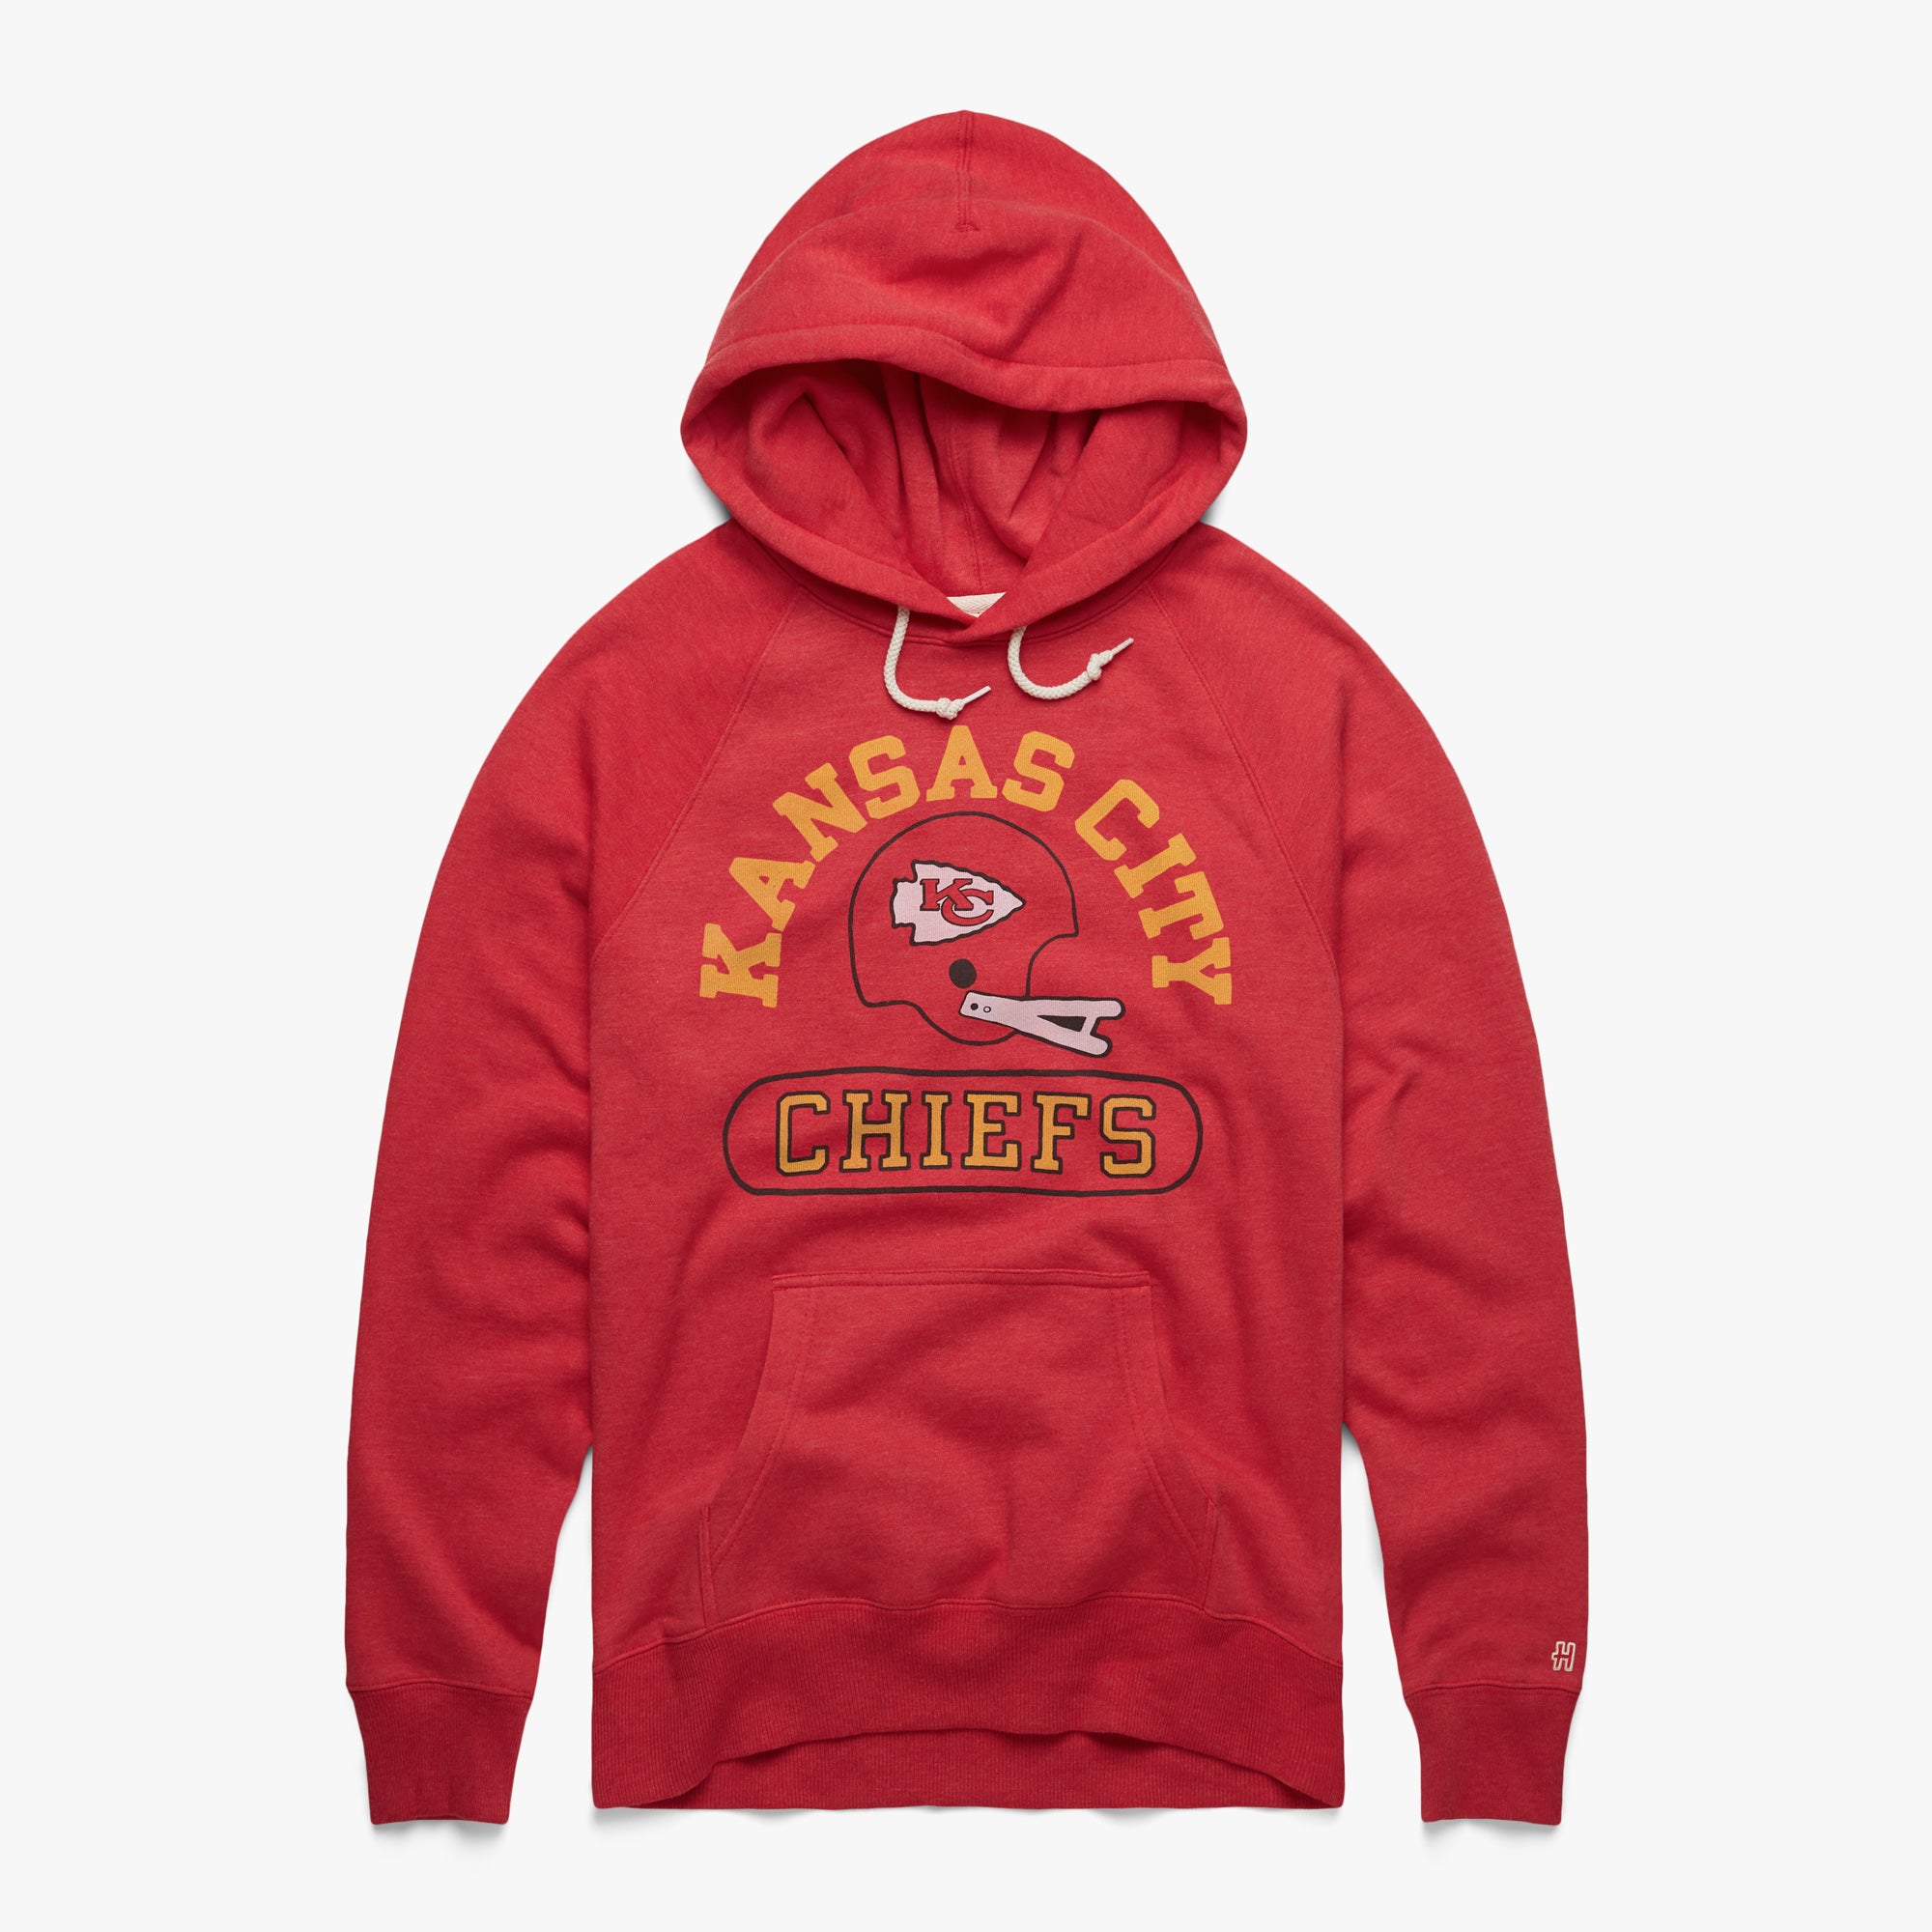 Kansas City Chiefs Throwback Helmet Hoodie from Homage. | Officially Licensed Vintage NFL Apparel from Homage Pro Shop.